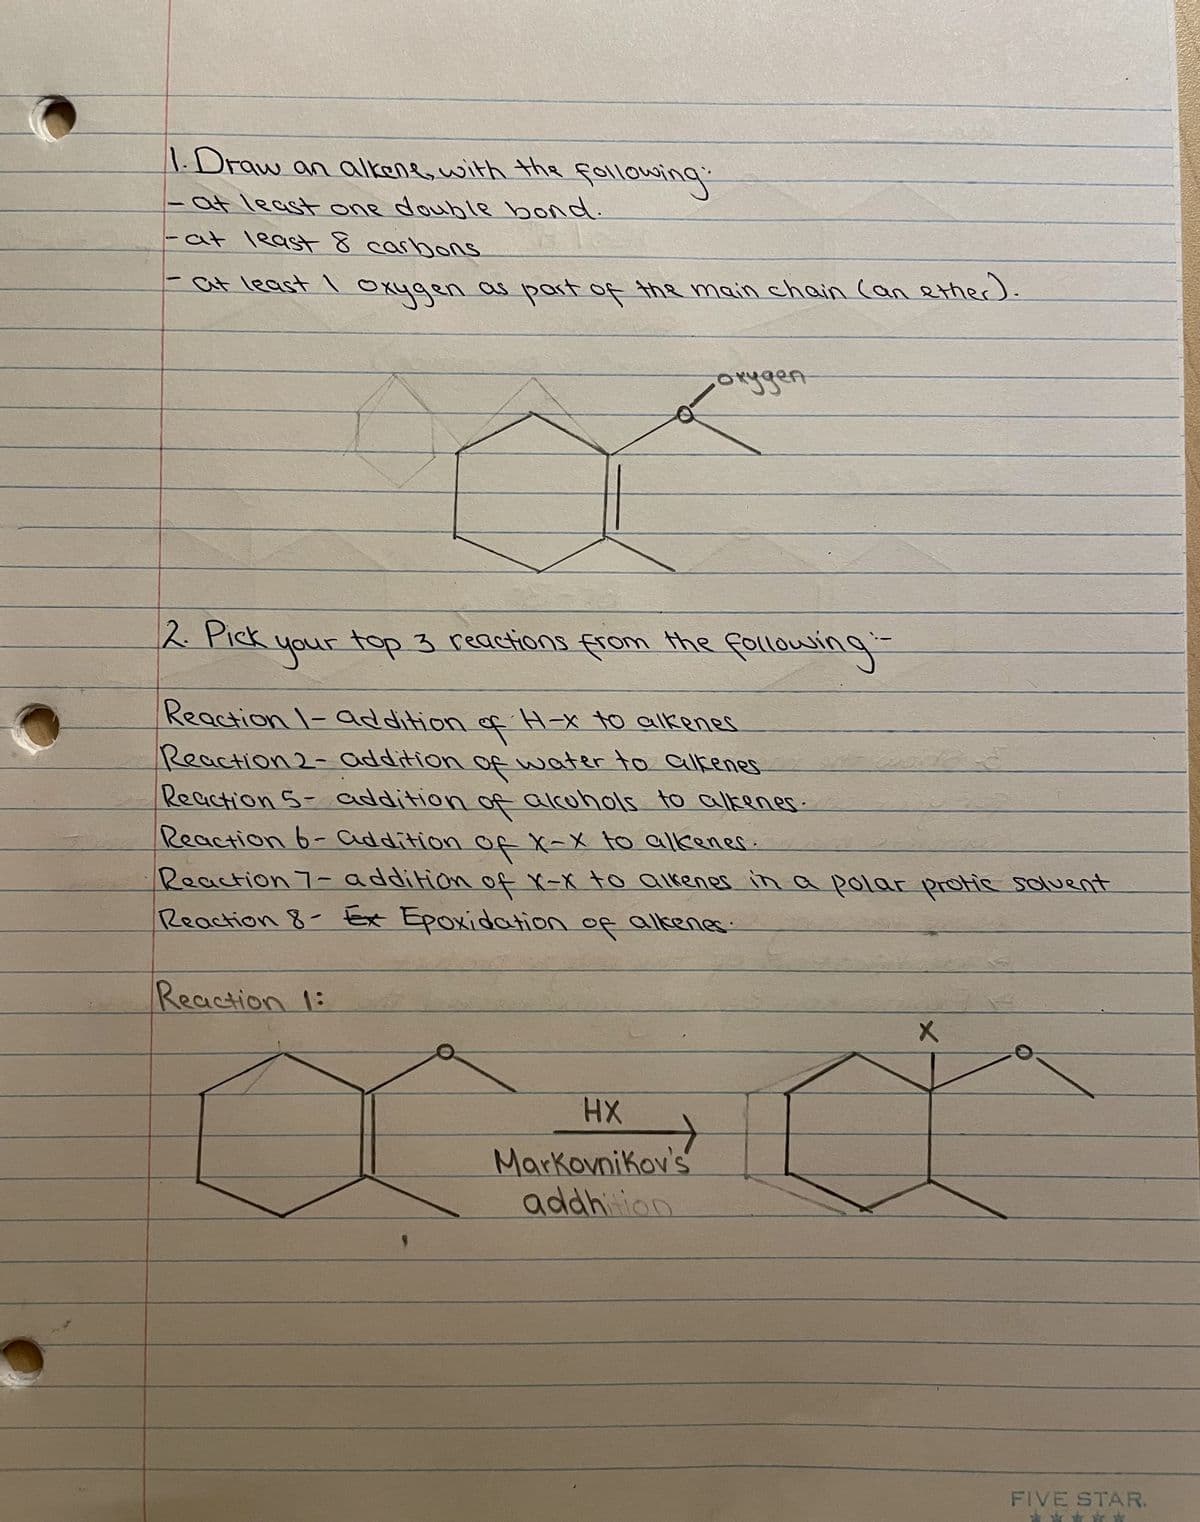 1.Draw an alkene, with the following:
- at least one double bond.
at least 8 carbons.
at least I oxygen as part of the main chain (an ether).
C
-
2. Pick
окуден
your top 3 reactions from the following:
Reaction 1- addition of H-x to alkenes
Reaction 2- addition of water to alkenes.
Reaction 5- addition of alcohols to alkenes.
Reaction 6-addition of X-X to alkenes.
Reaction 7- addition of X-X to alkenes in a polar protic solvent
Reaction 8- Ex Epoxidation of alkenes.
Reaction 1:
HX
Markovnikov's
addhition
→
X
FIVE STAR.